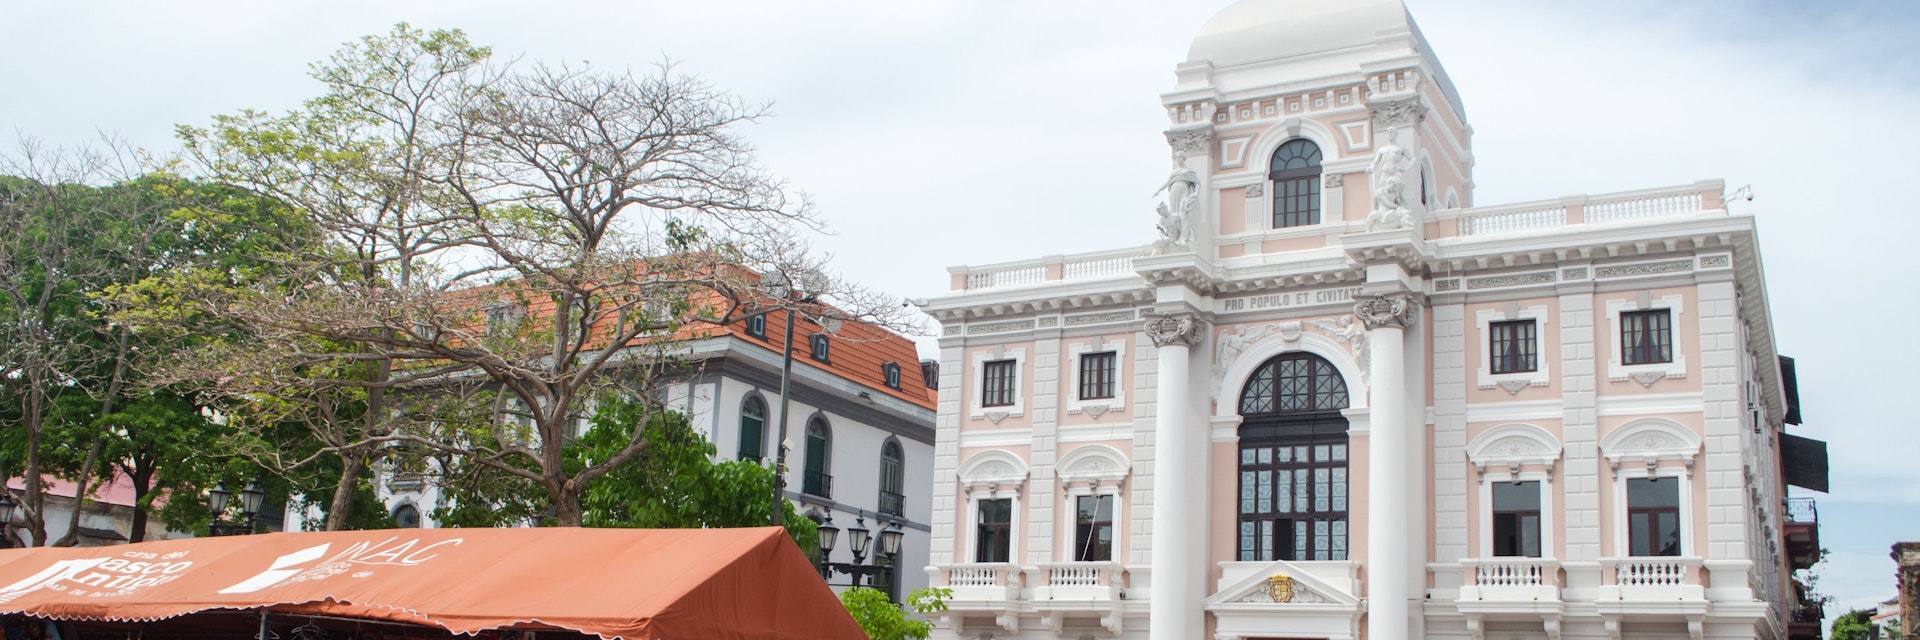 Panama City, Panama - May 19, 2019: Two historical buildings of the Old Panama City.  Panama Canal Museum can be seen on the left; on the right stands the Municipal Palace (white building). The Museum of History of Panama (Spanish: Museo de Historia de Panamá) is a history museum located on the ground floor of the Municipal Palace of Panama City.